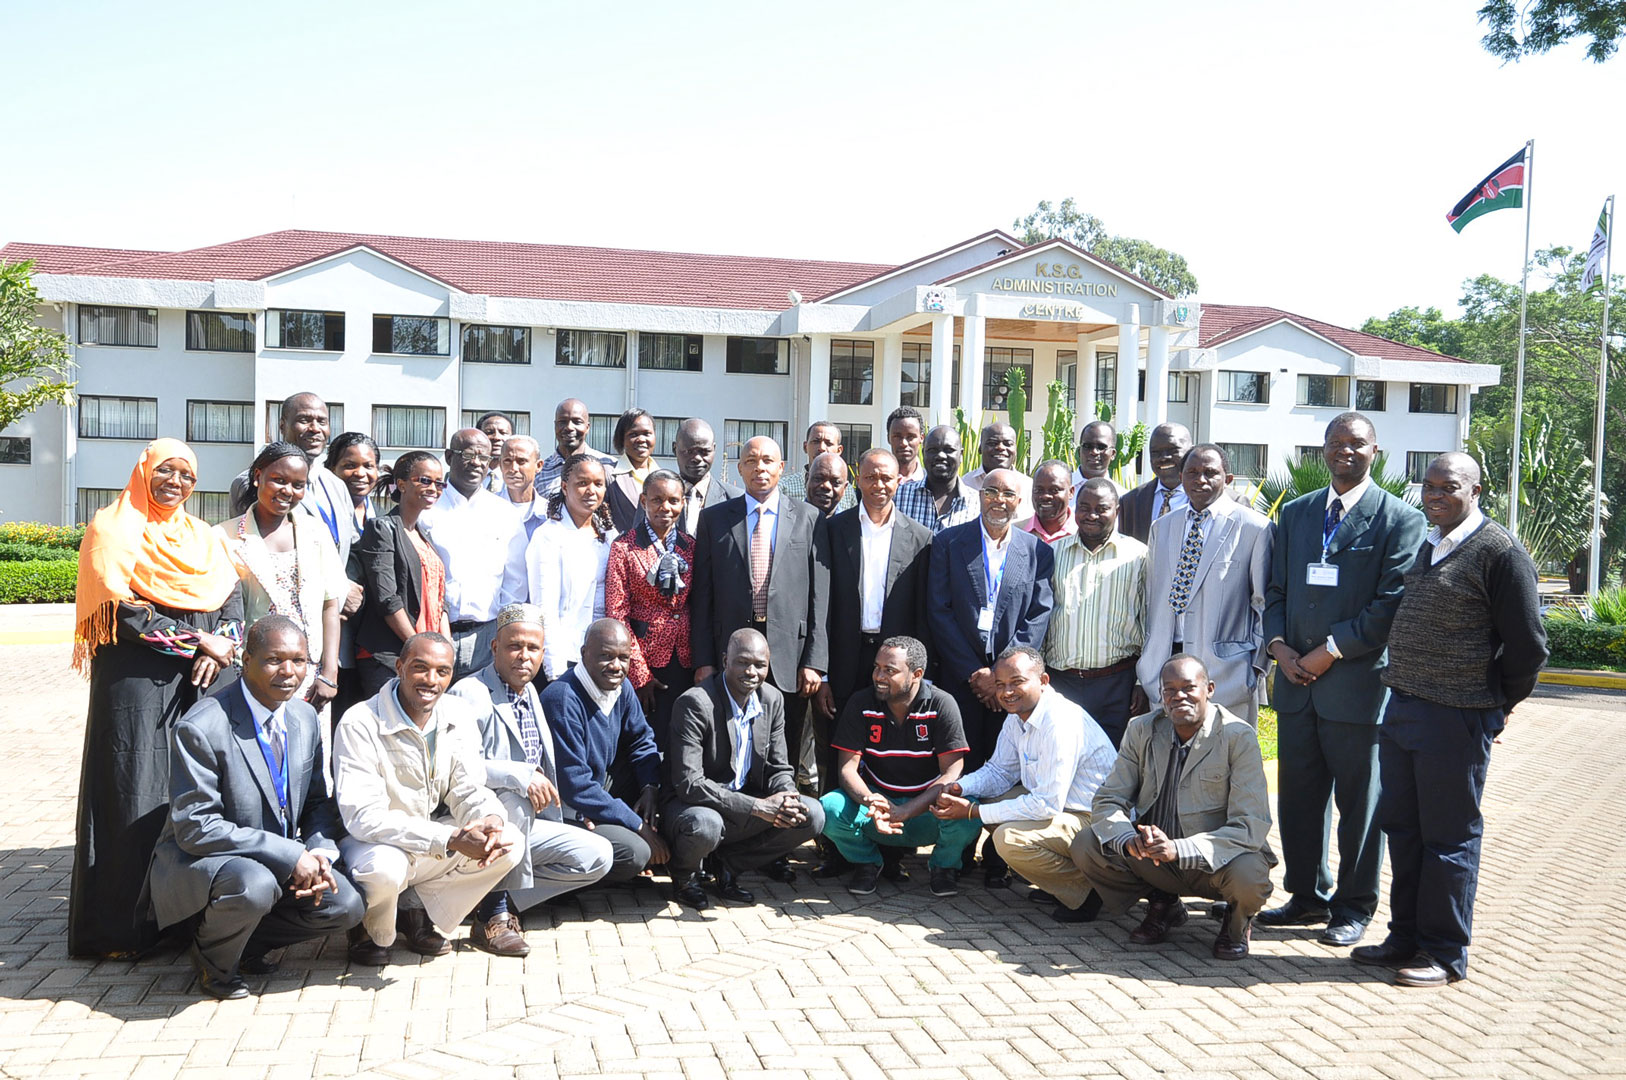  [© 2014 AU-IBAR. Participants attending a training programme in Surveillance and Epidemiology of Trade-Related Transboundary Animal Diseases being Offered by the University of Nairobi, Faculty of Veterinary Medicine.] © 2014 AU-IBAR. Participants attending a training programme in Surveillance and Epidemiology of Trade-Related Transboundary Animal Diseases being Offered by the University of Nairobi, Faculty of Veterinary Medicine